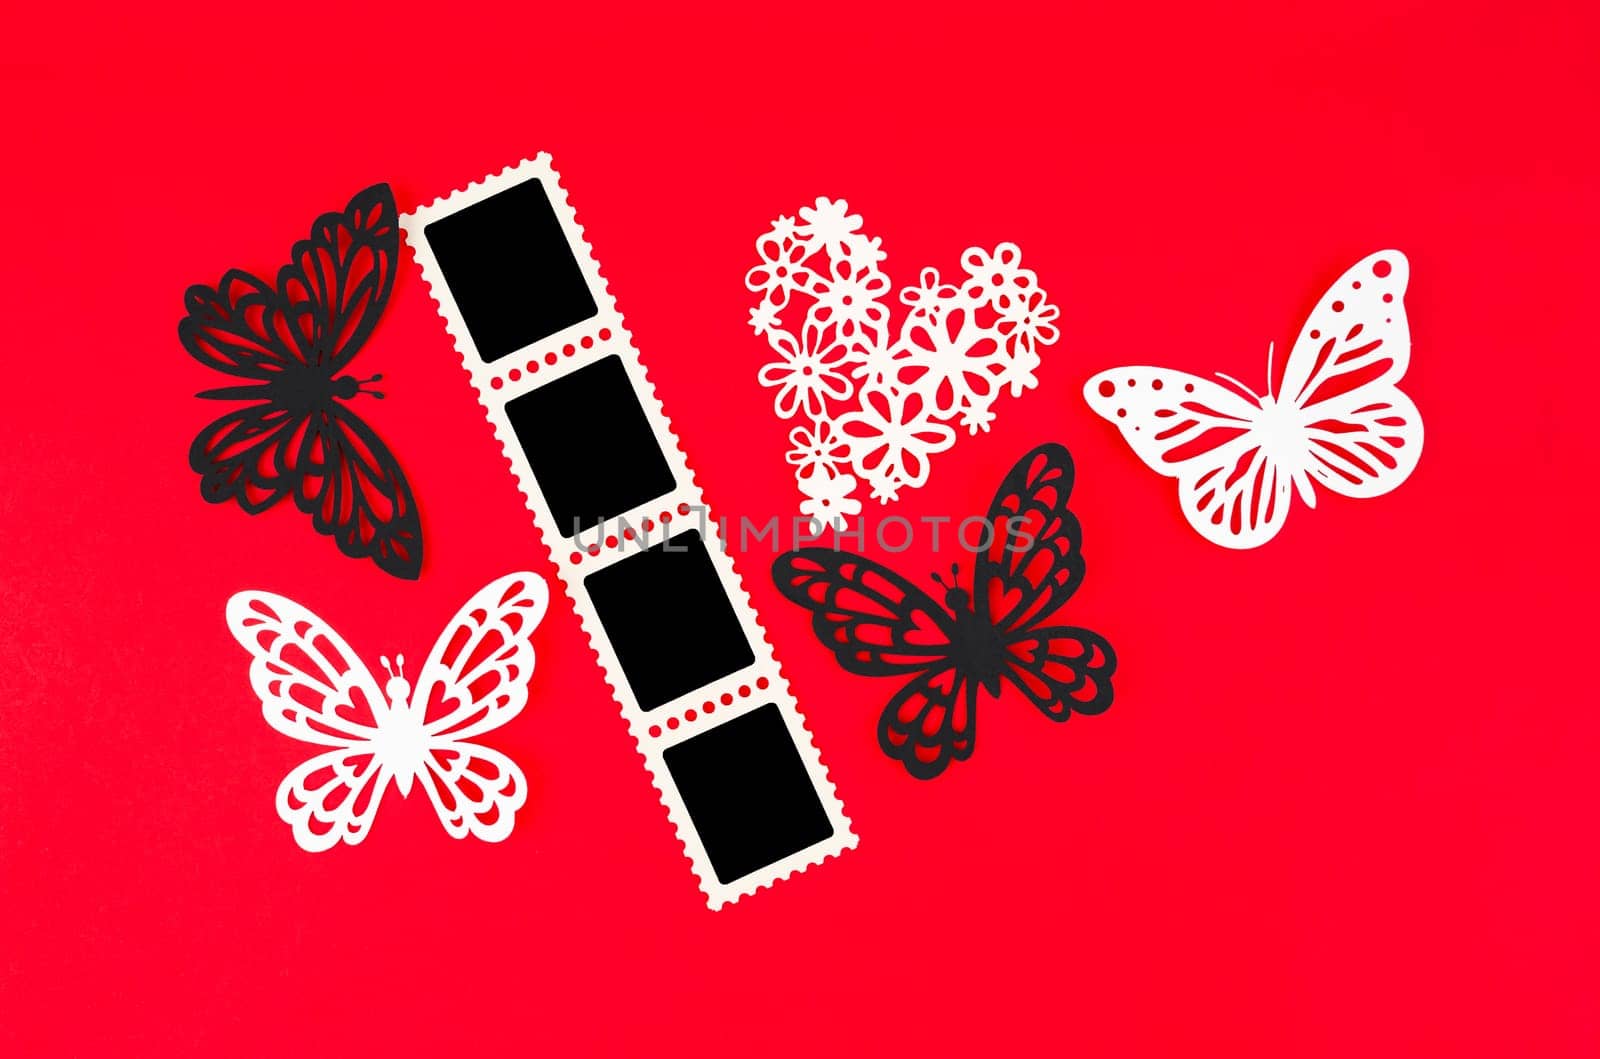 The Cinema strip photo paper frames with butterfly paper on red background. Save clipping path. by Gamjai